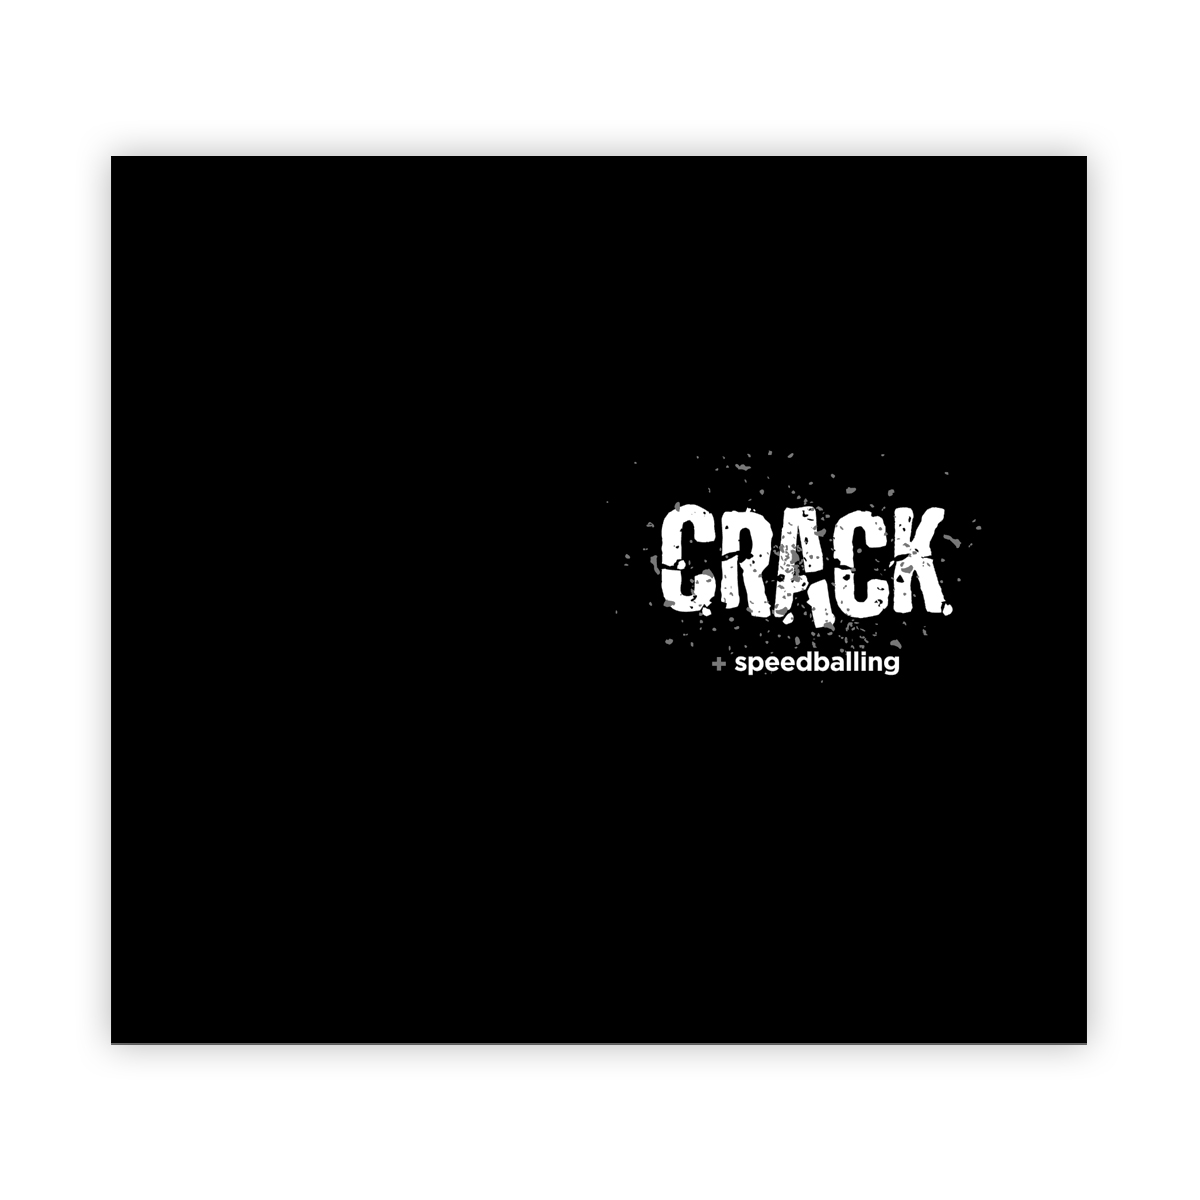 Crack + speedballing booklet (New edition coming soon)